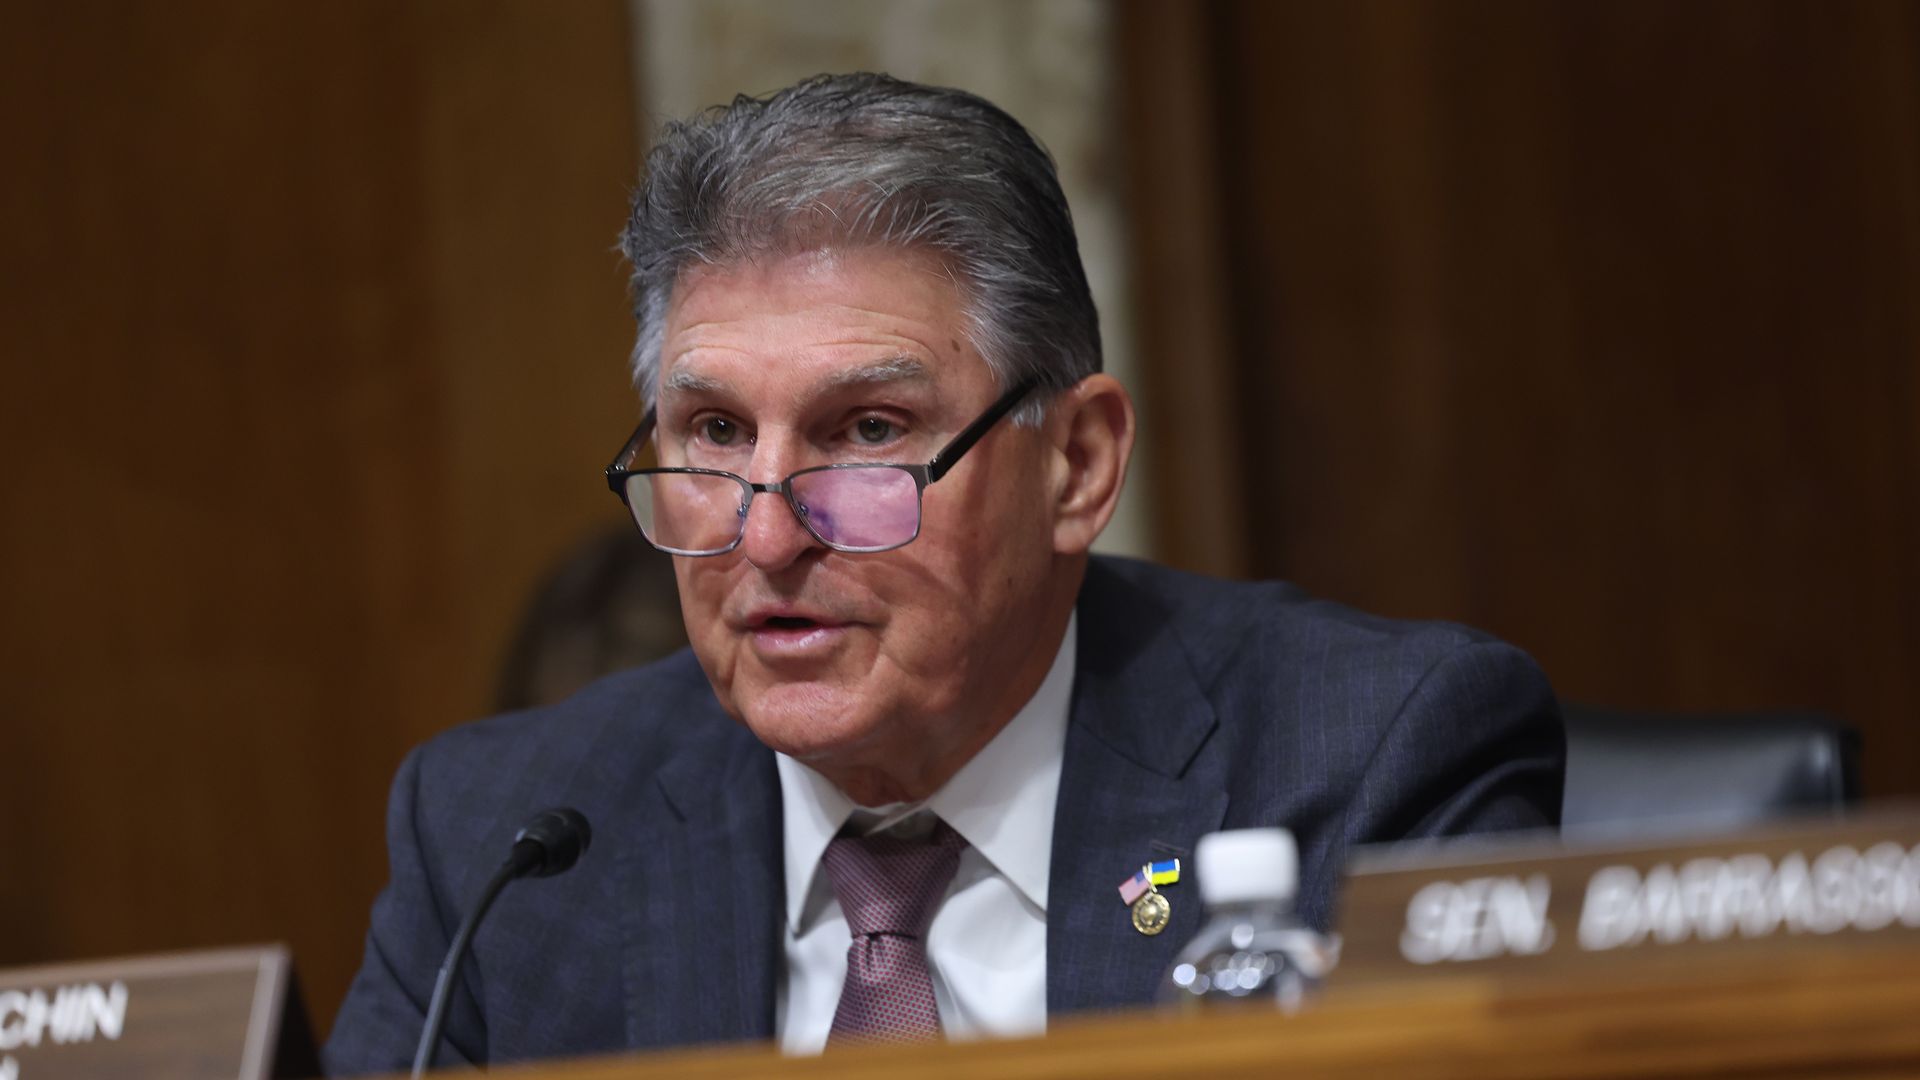 Sen. Joe Manchin (D-WV), Chairman of the Senate Energy and Natural Resources Committee, questions Interior Secretary Deb Haaland during a hearing on May 02, 2023